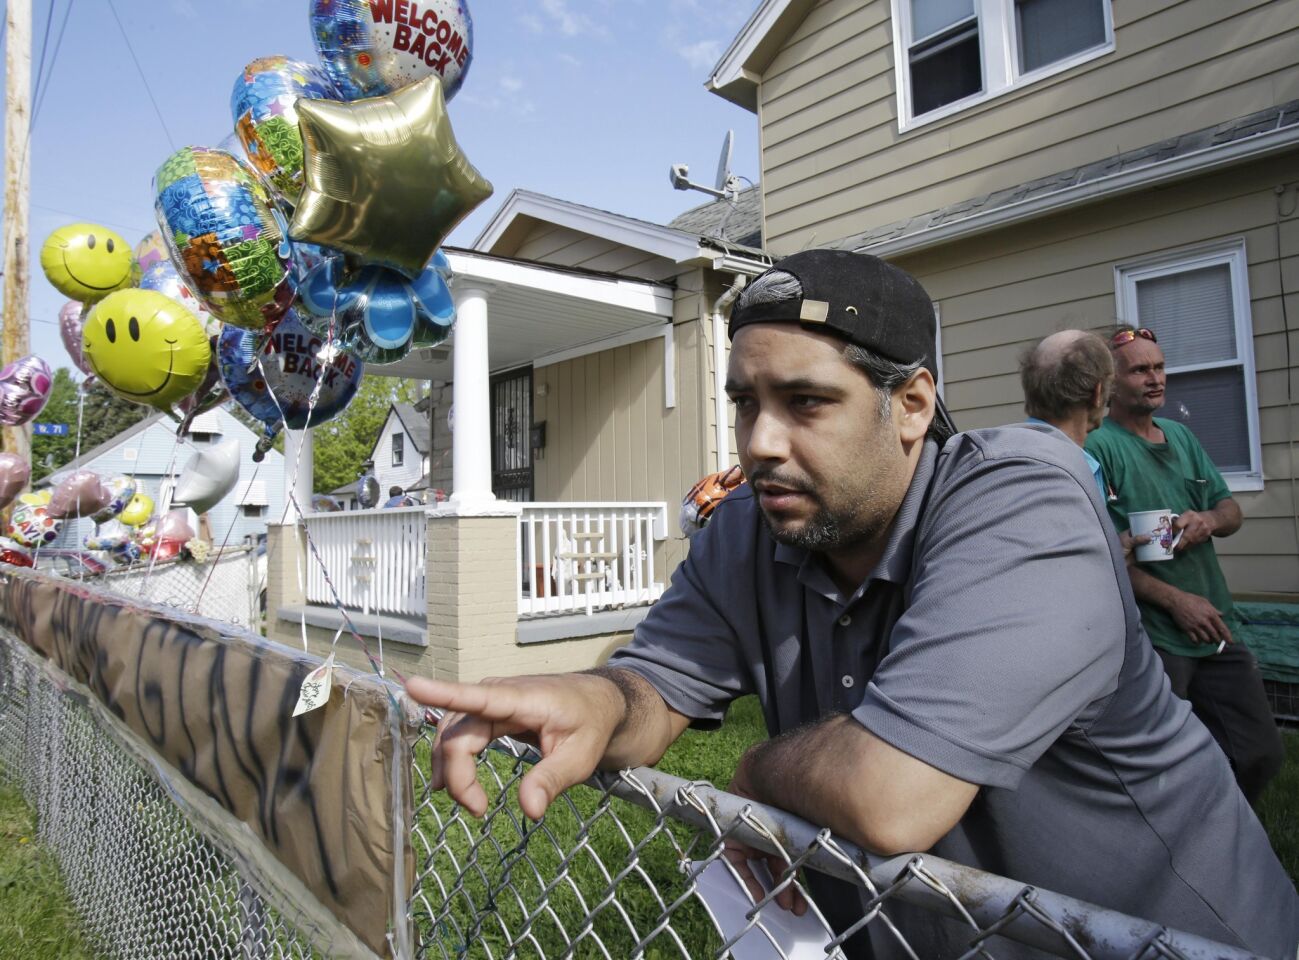 Ricardo DeJesus talks about his sister Gina at the family's home in Cleveland. Police said Gina DeJesus and two other women who went missing separately about a decade ago were found Monday.